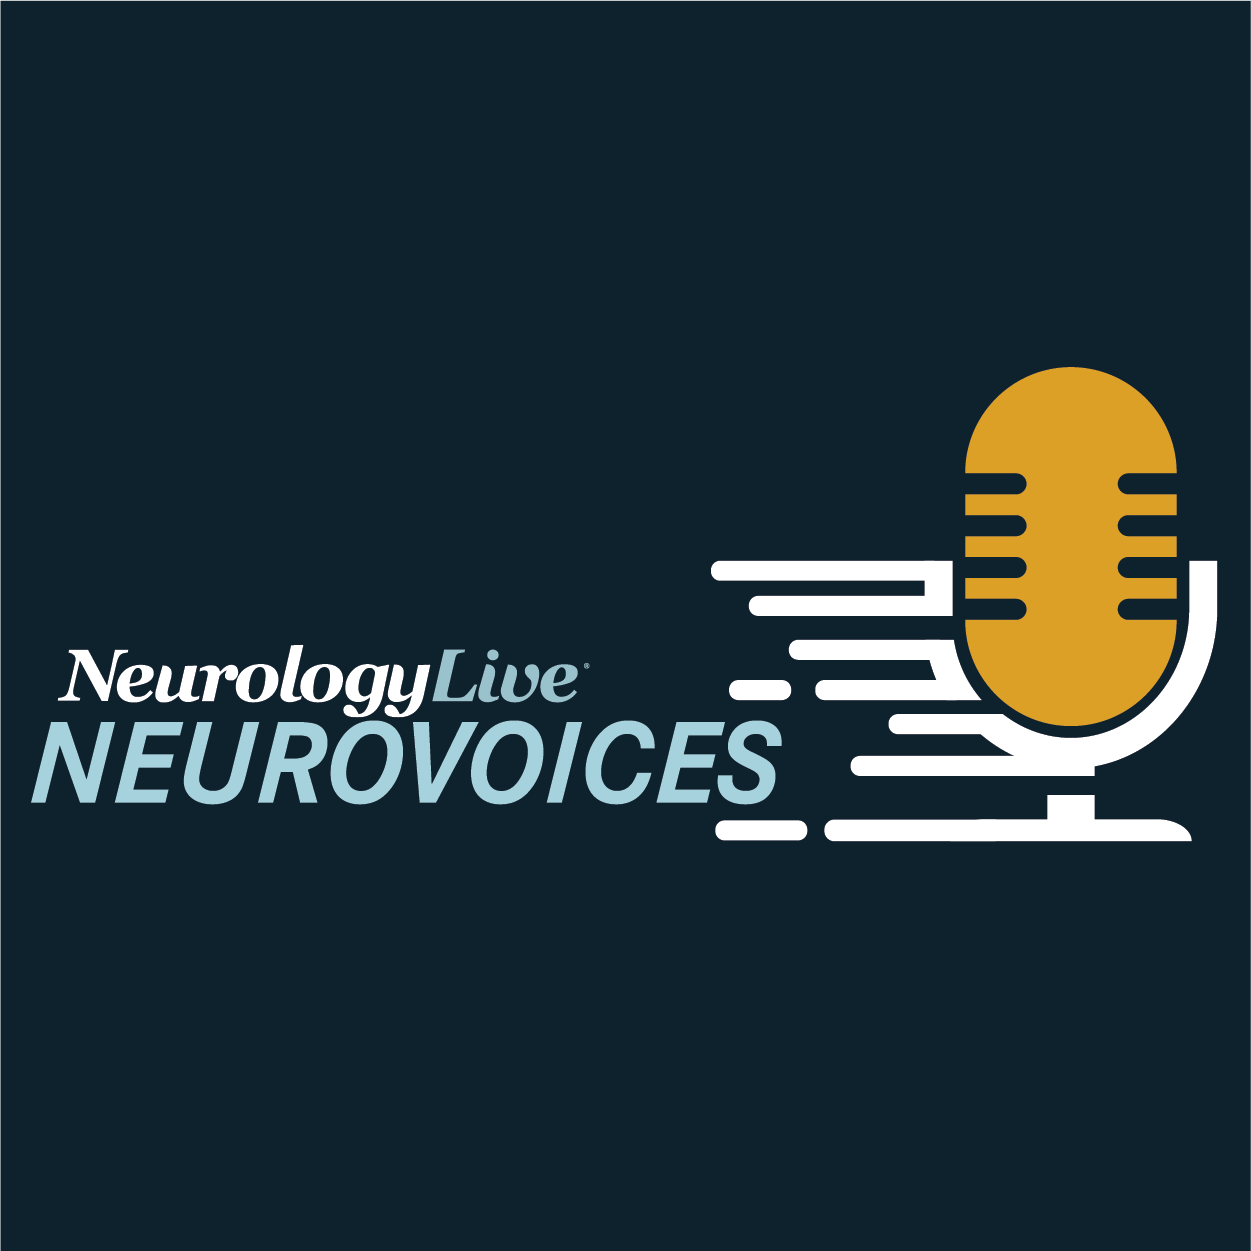 NeuroVoices: Stephen From, on AB126 and Exosomes in Treating Stroke